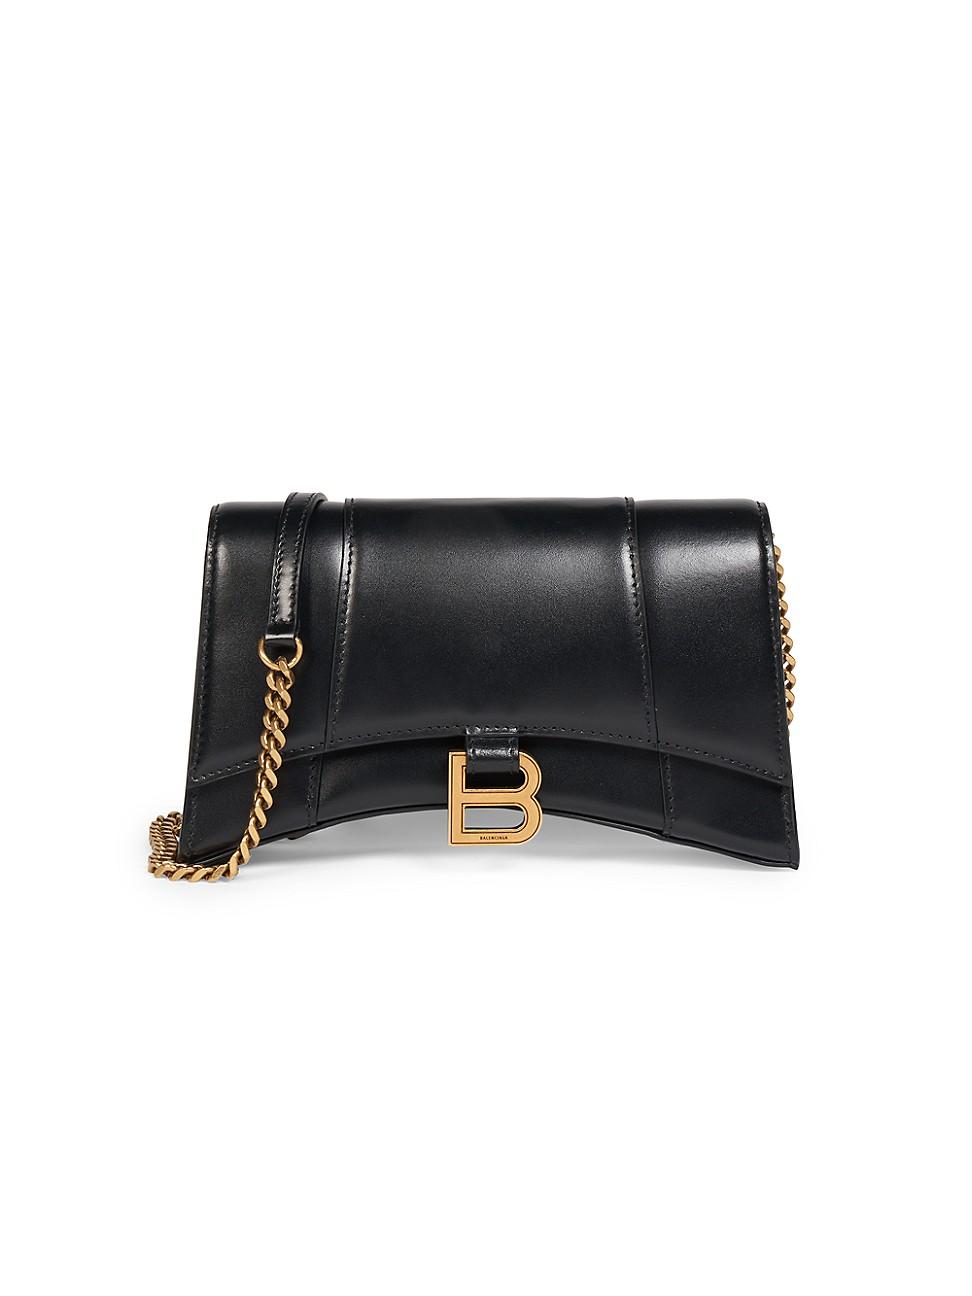 Balenciaga Hourglass Leather Evening Bag in Black - Lyst